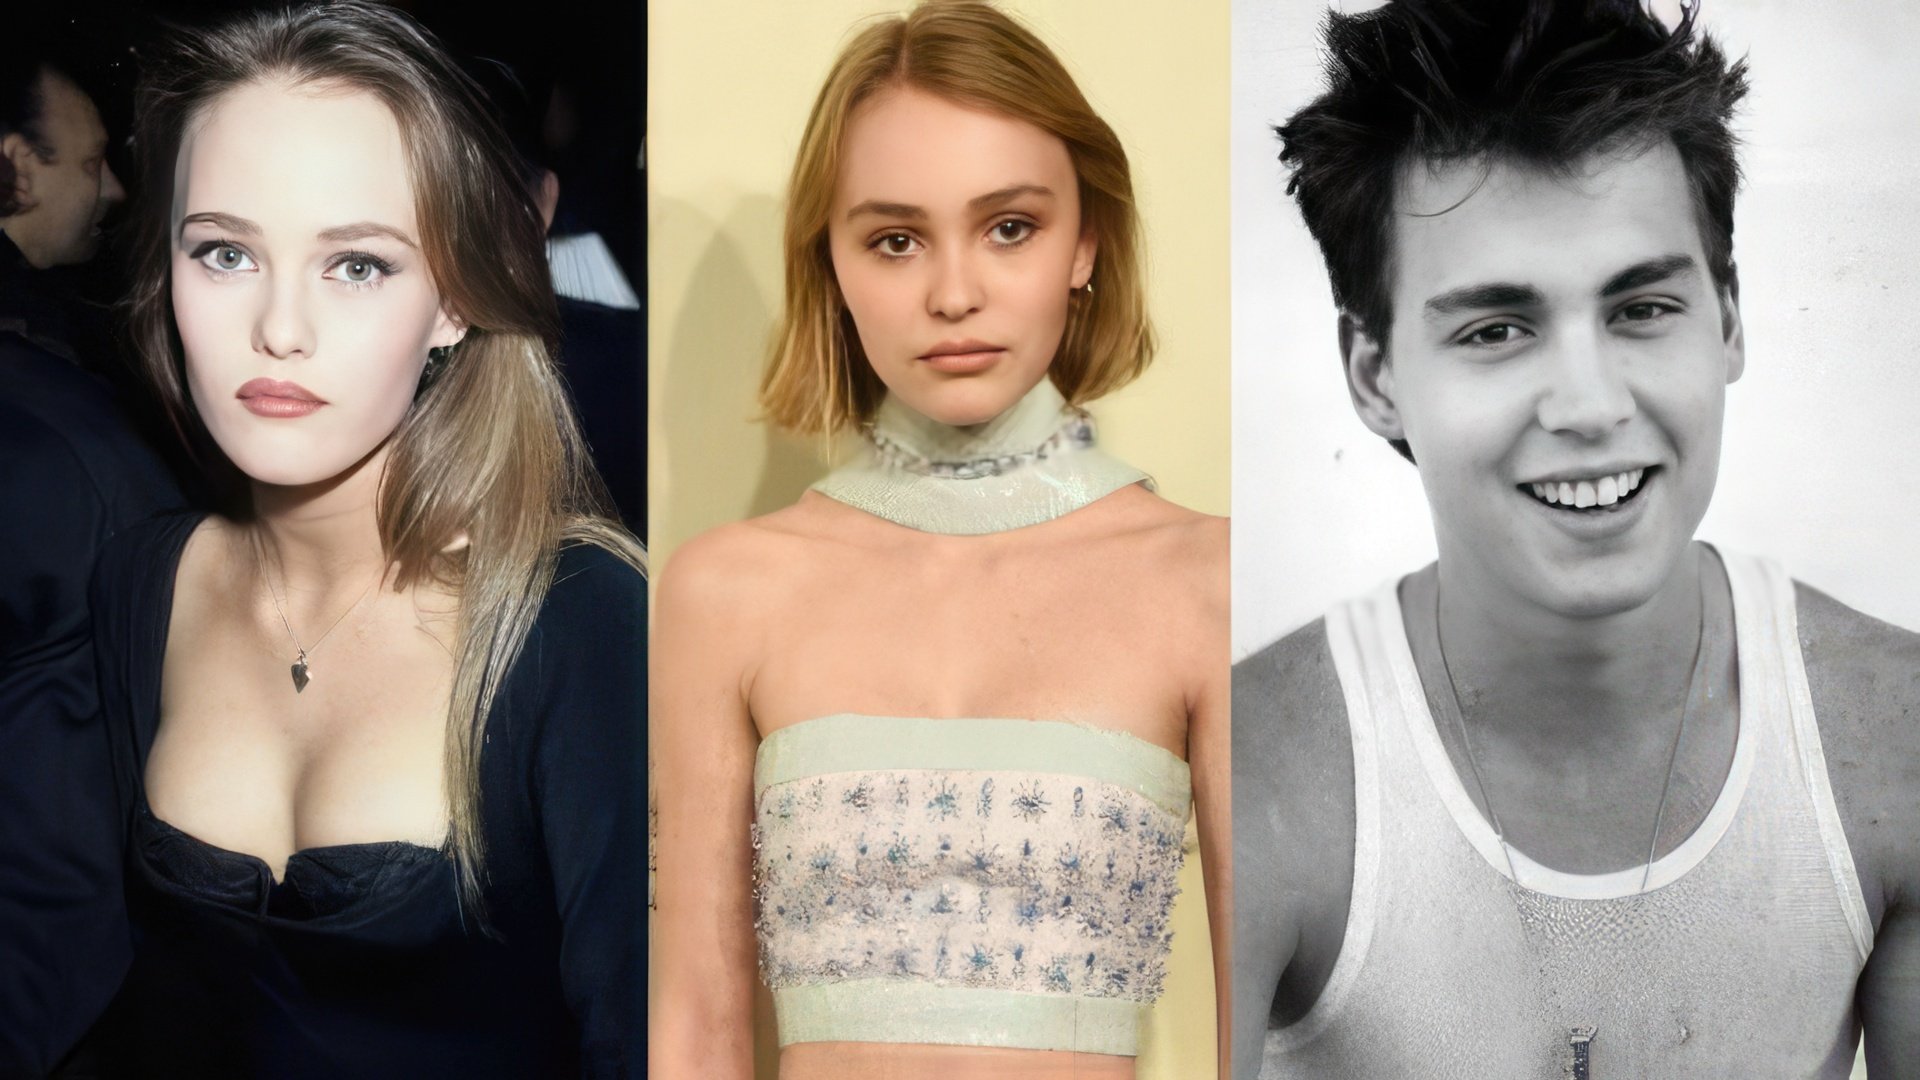 Lily-Rose Depp’s parents gifted her their extraordinary genes